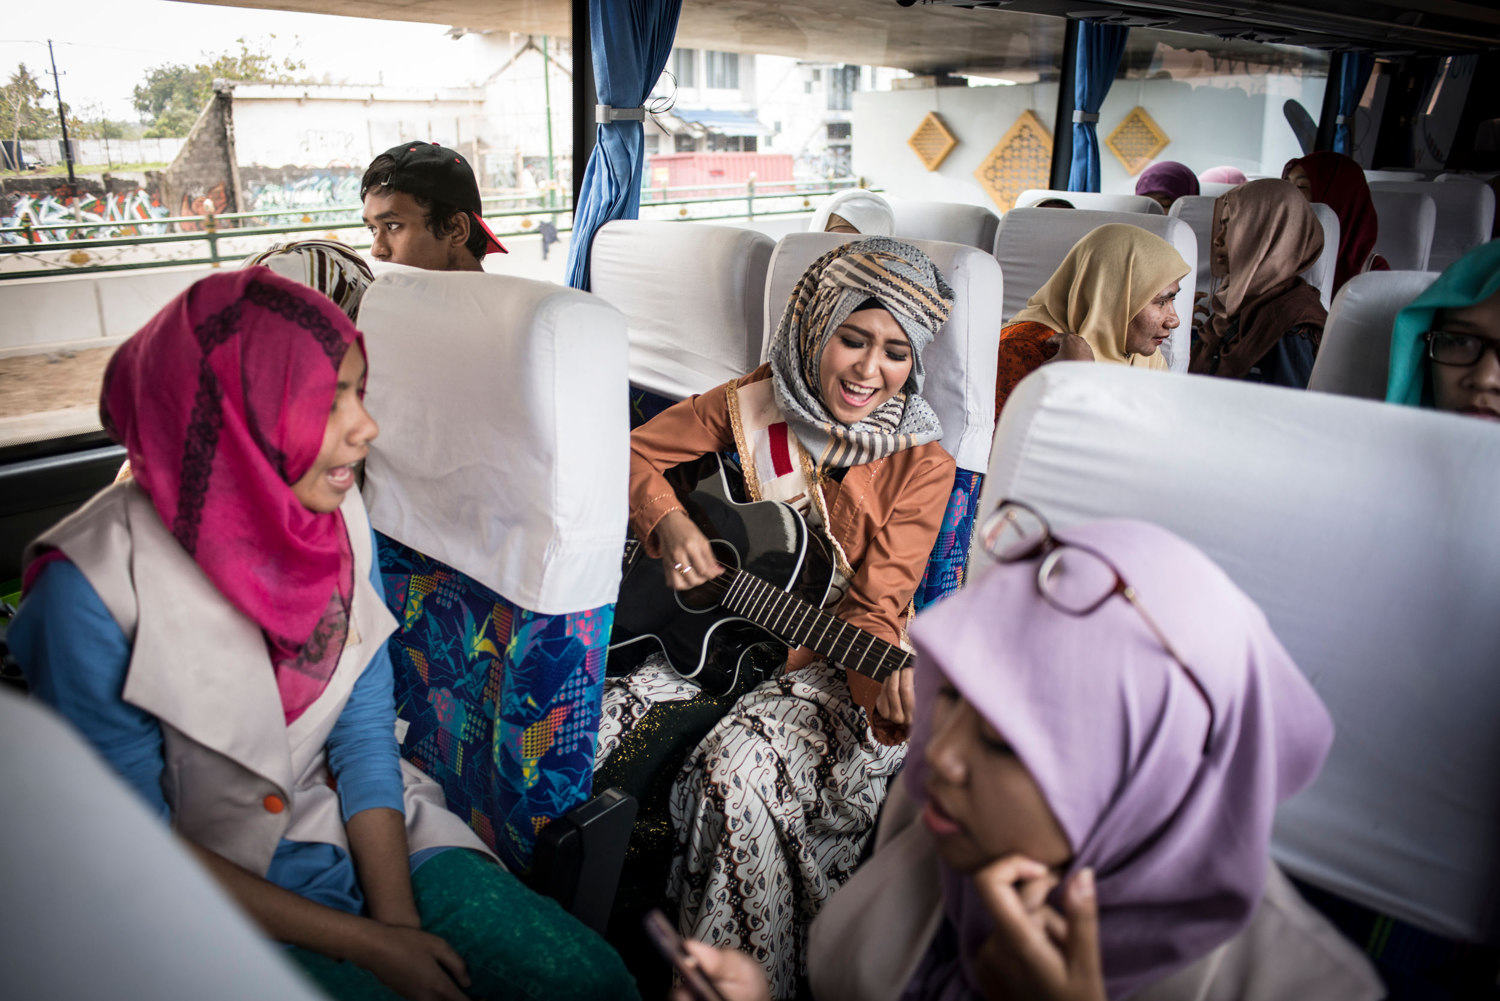  Indonesian finalist Elis Sholihah leads a sing-along on the bus between events.
 